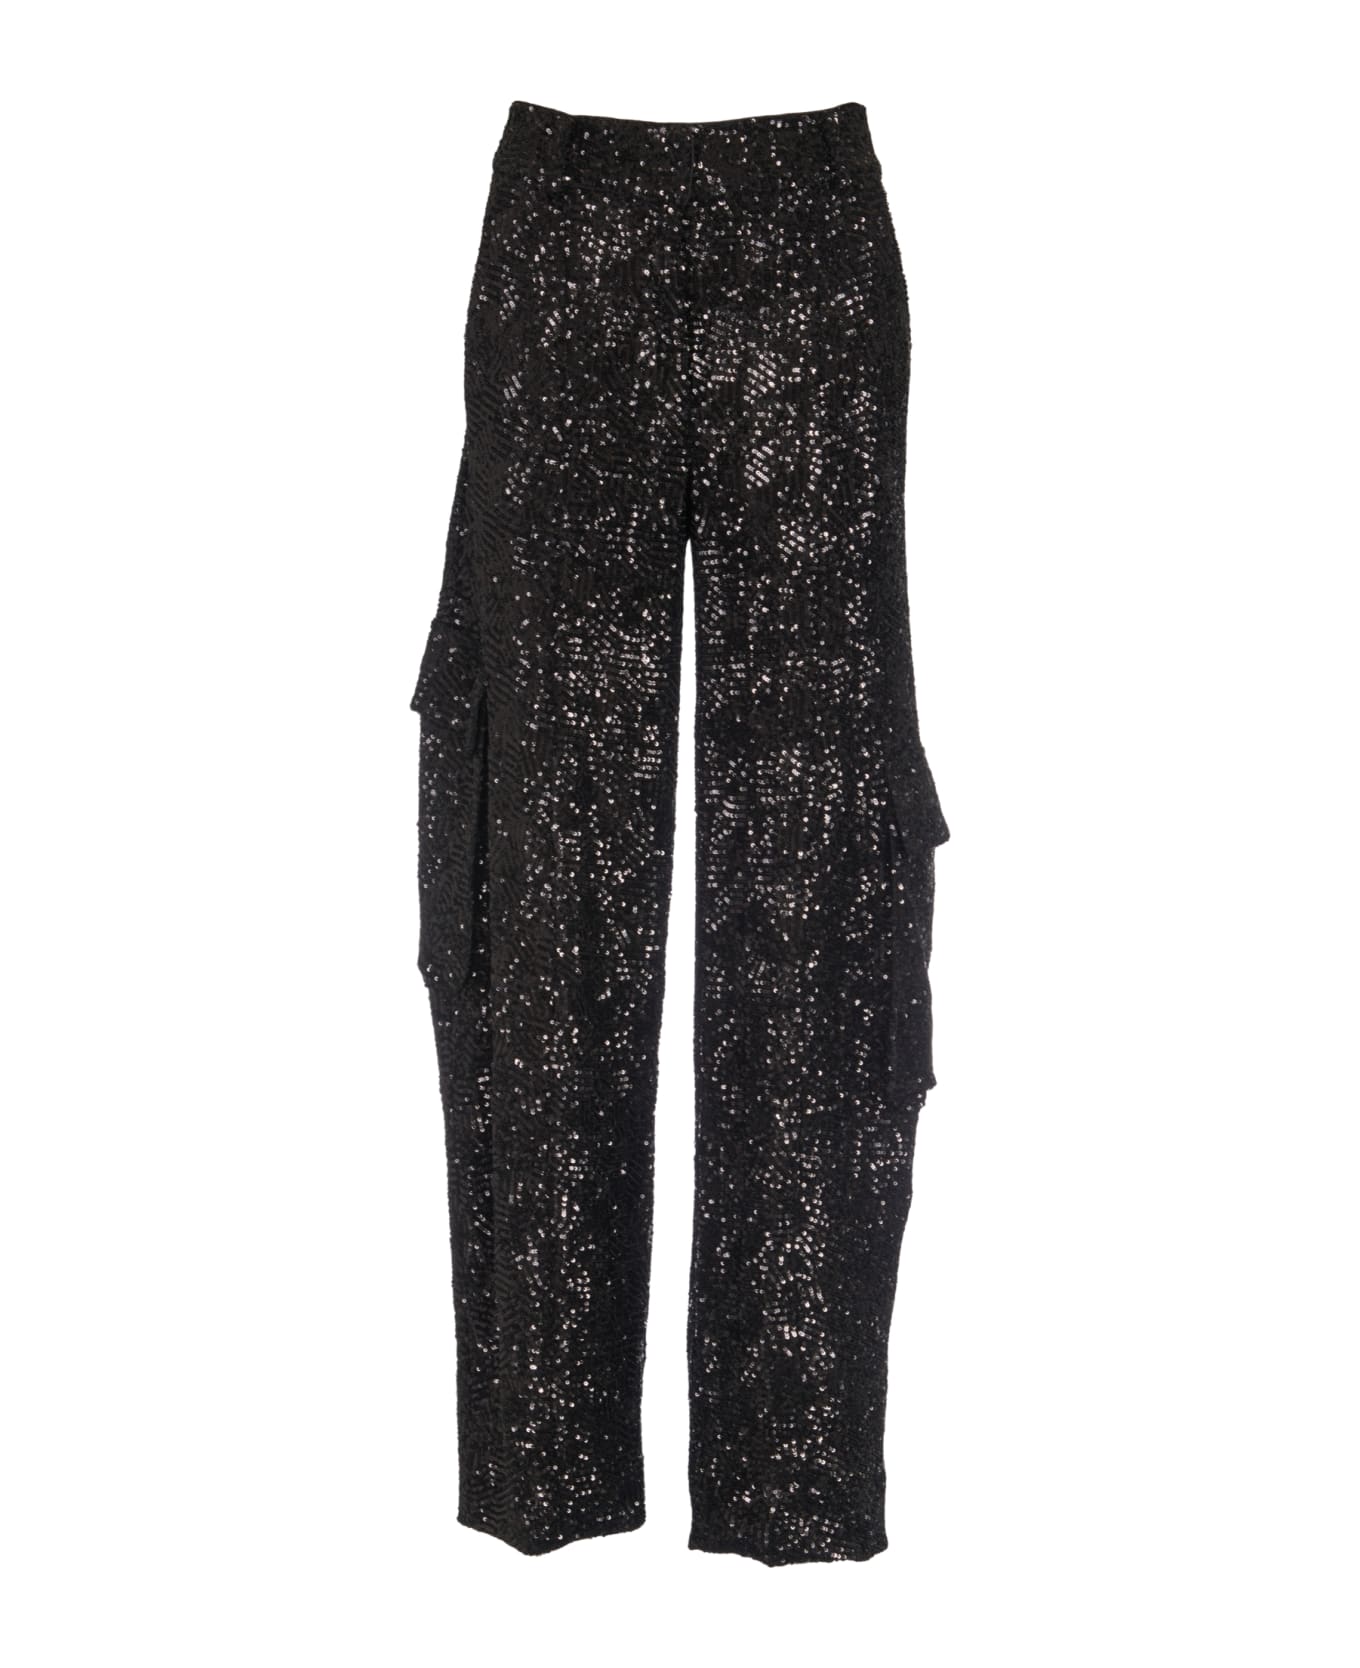 Rotate by Birger Christensen Sequin Cargo Trousers - Black